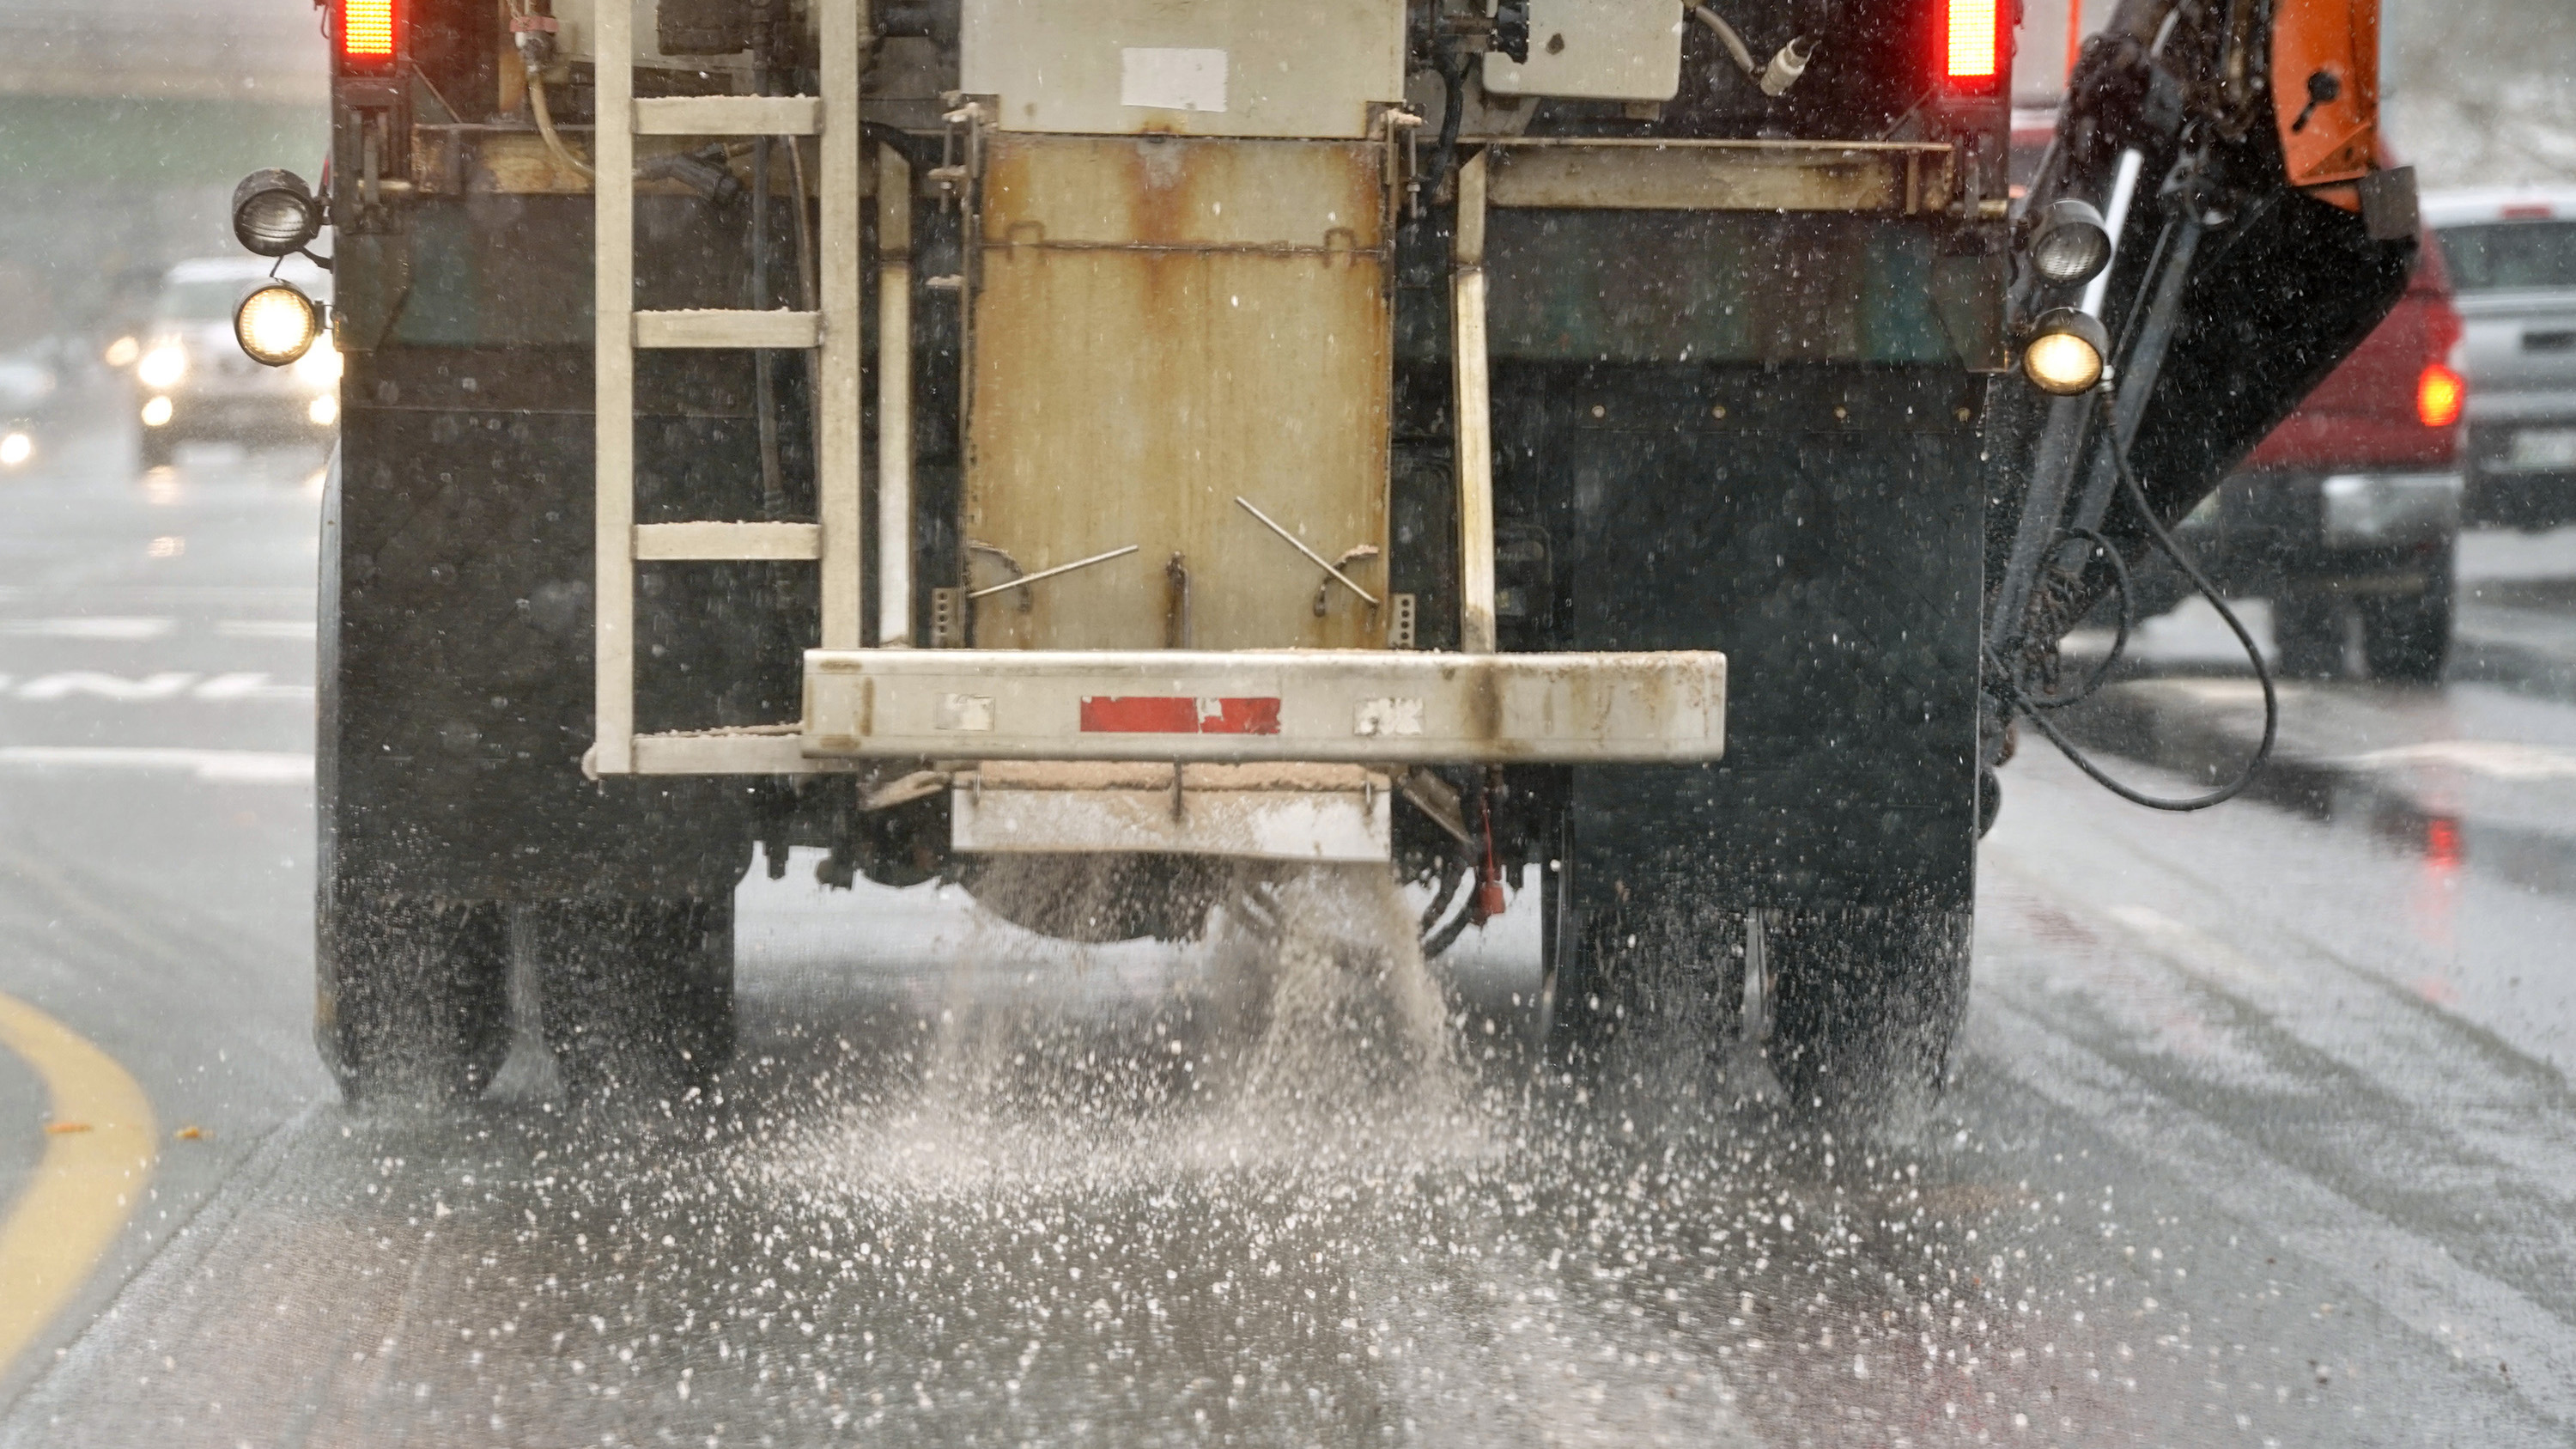 A truck spreads salt on a road in Maine.